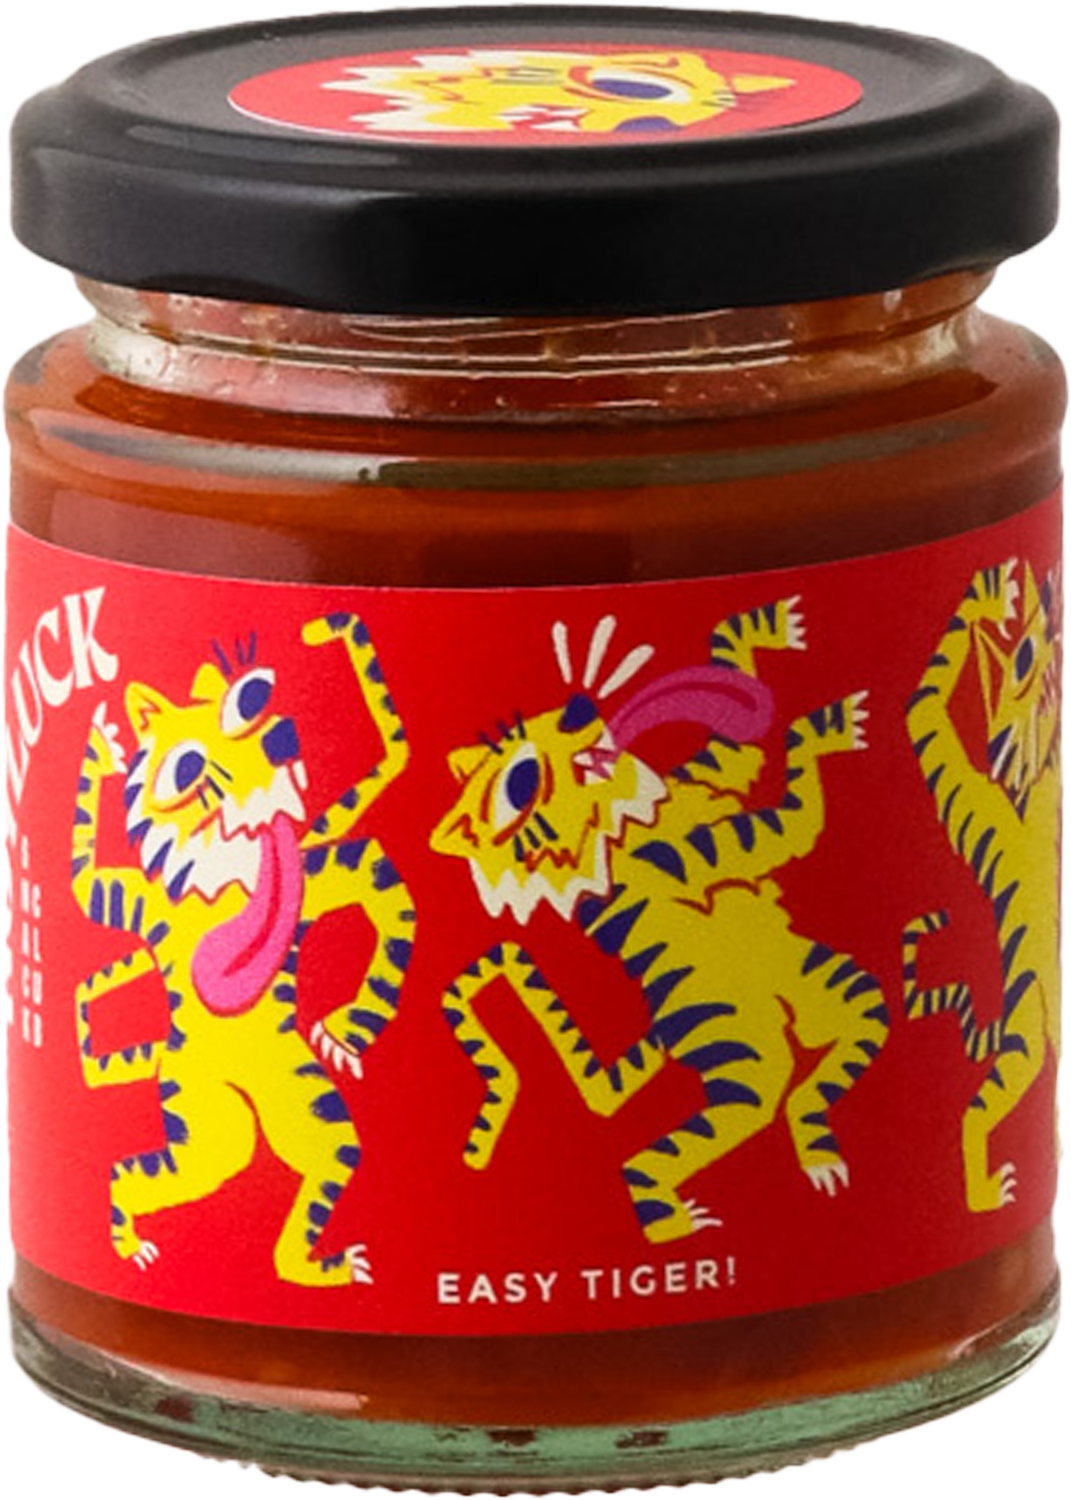 Hotluck - Easy Tiger Fermented Chilli Sauce